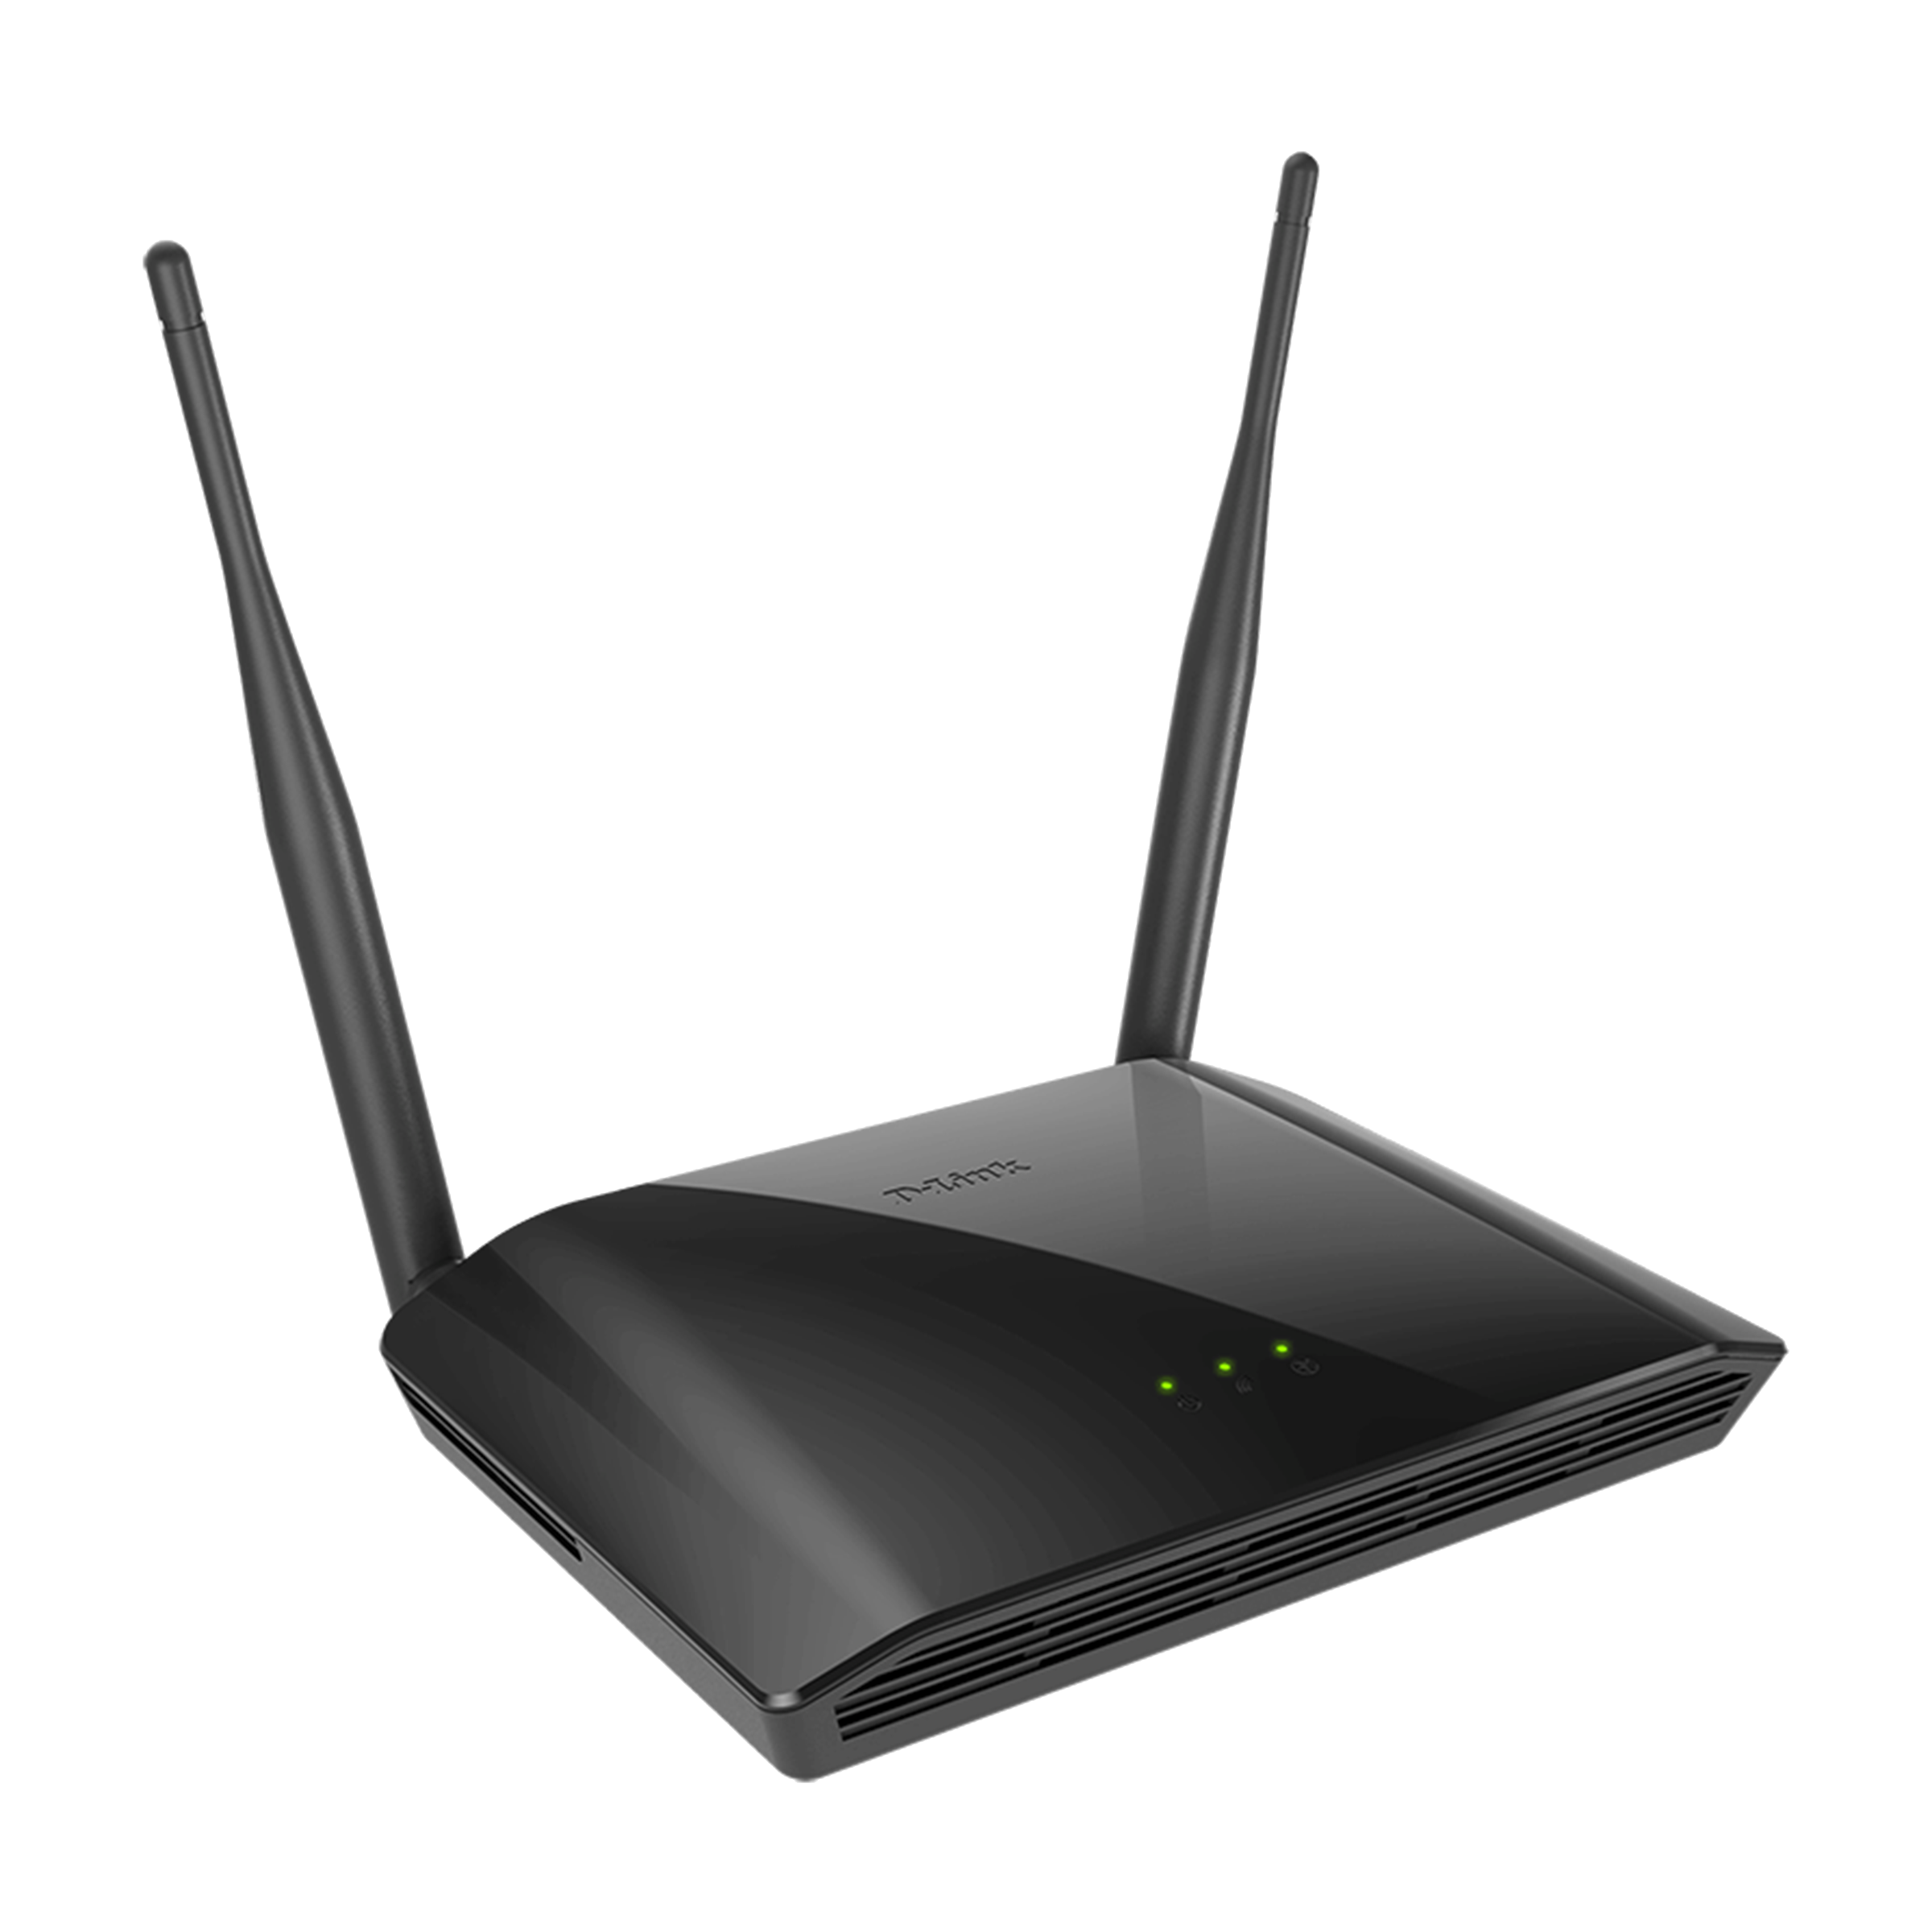 D-Link N300 Single Band 300 Mbps WiFi Router (2 Antennas, 4 LAN Ports, Wireless Guest Zone, DIR-615, Black)_3